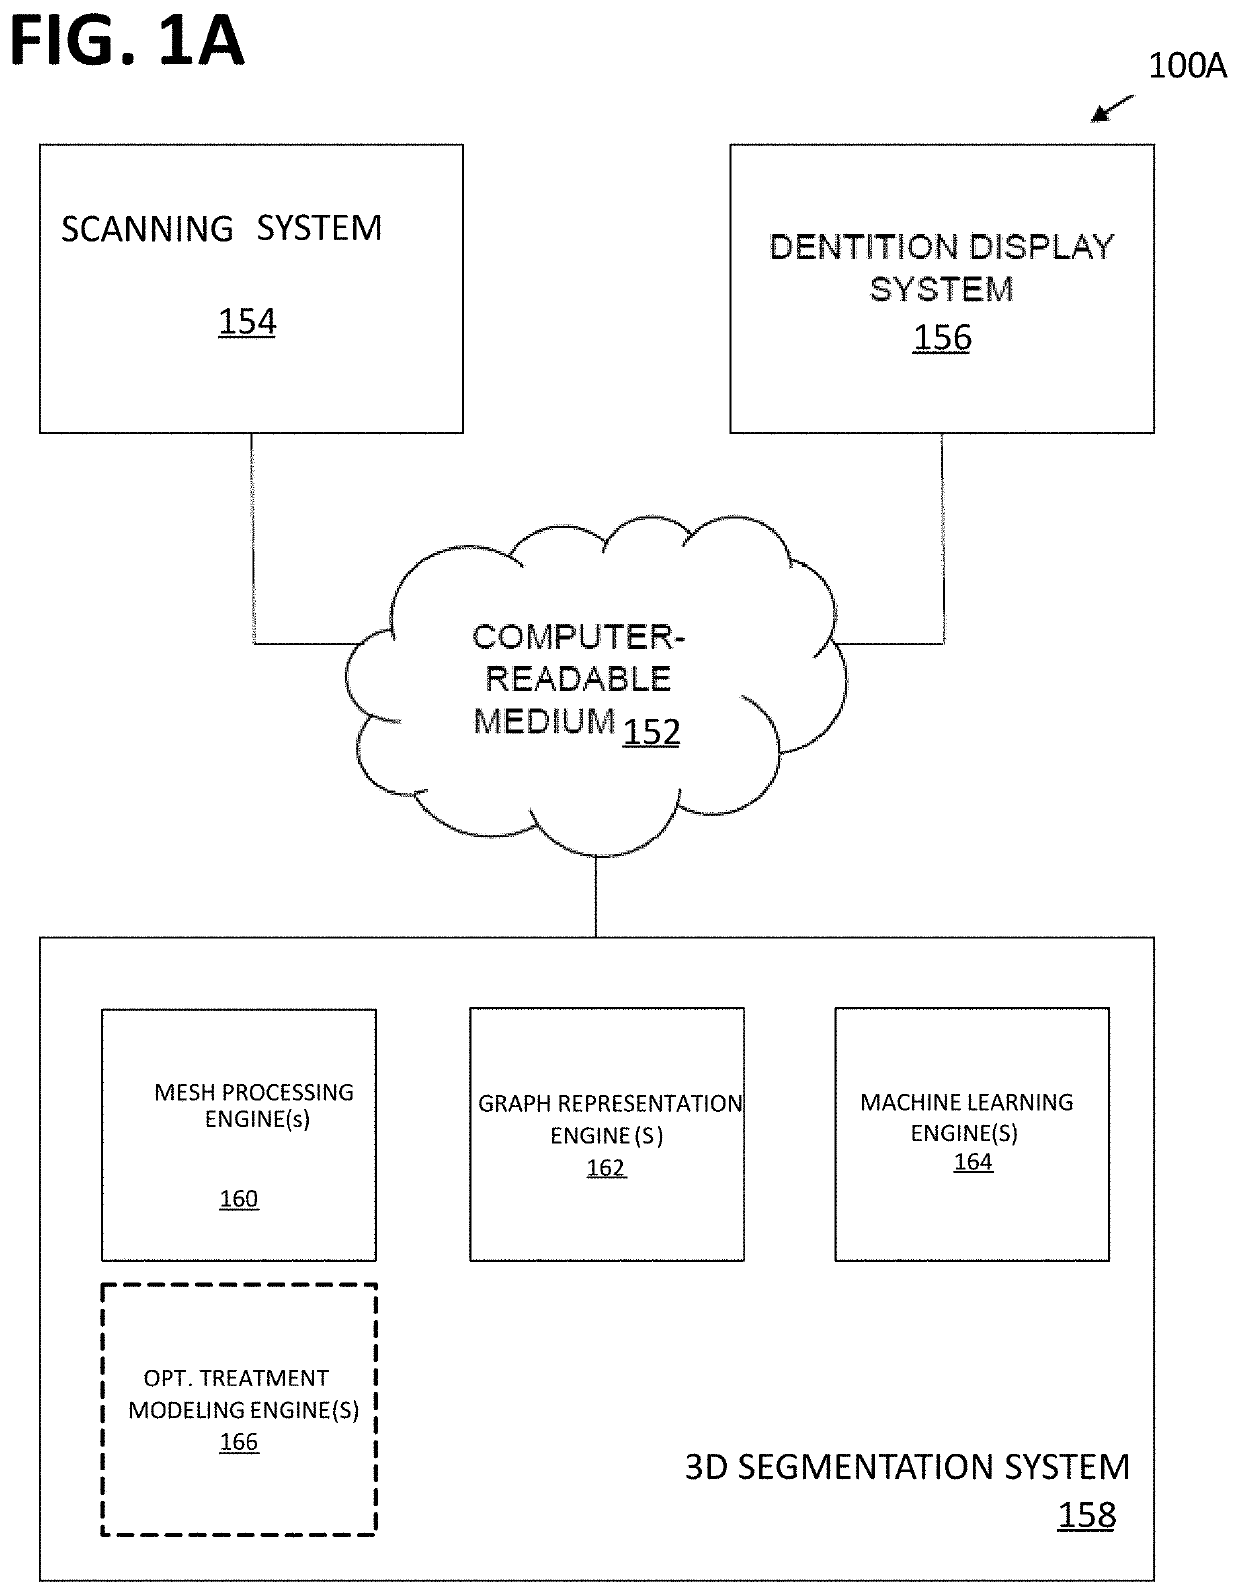 Machine learning dental segmentation system and methods using graph-based approaches